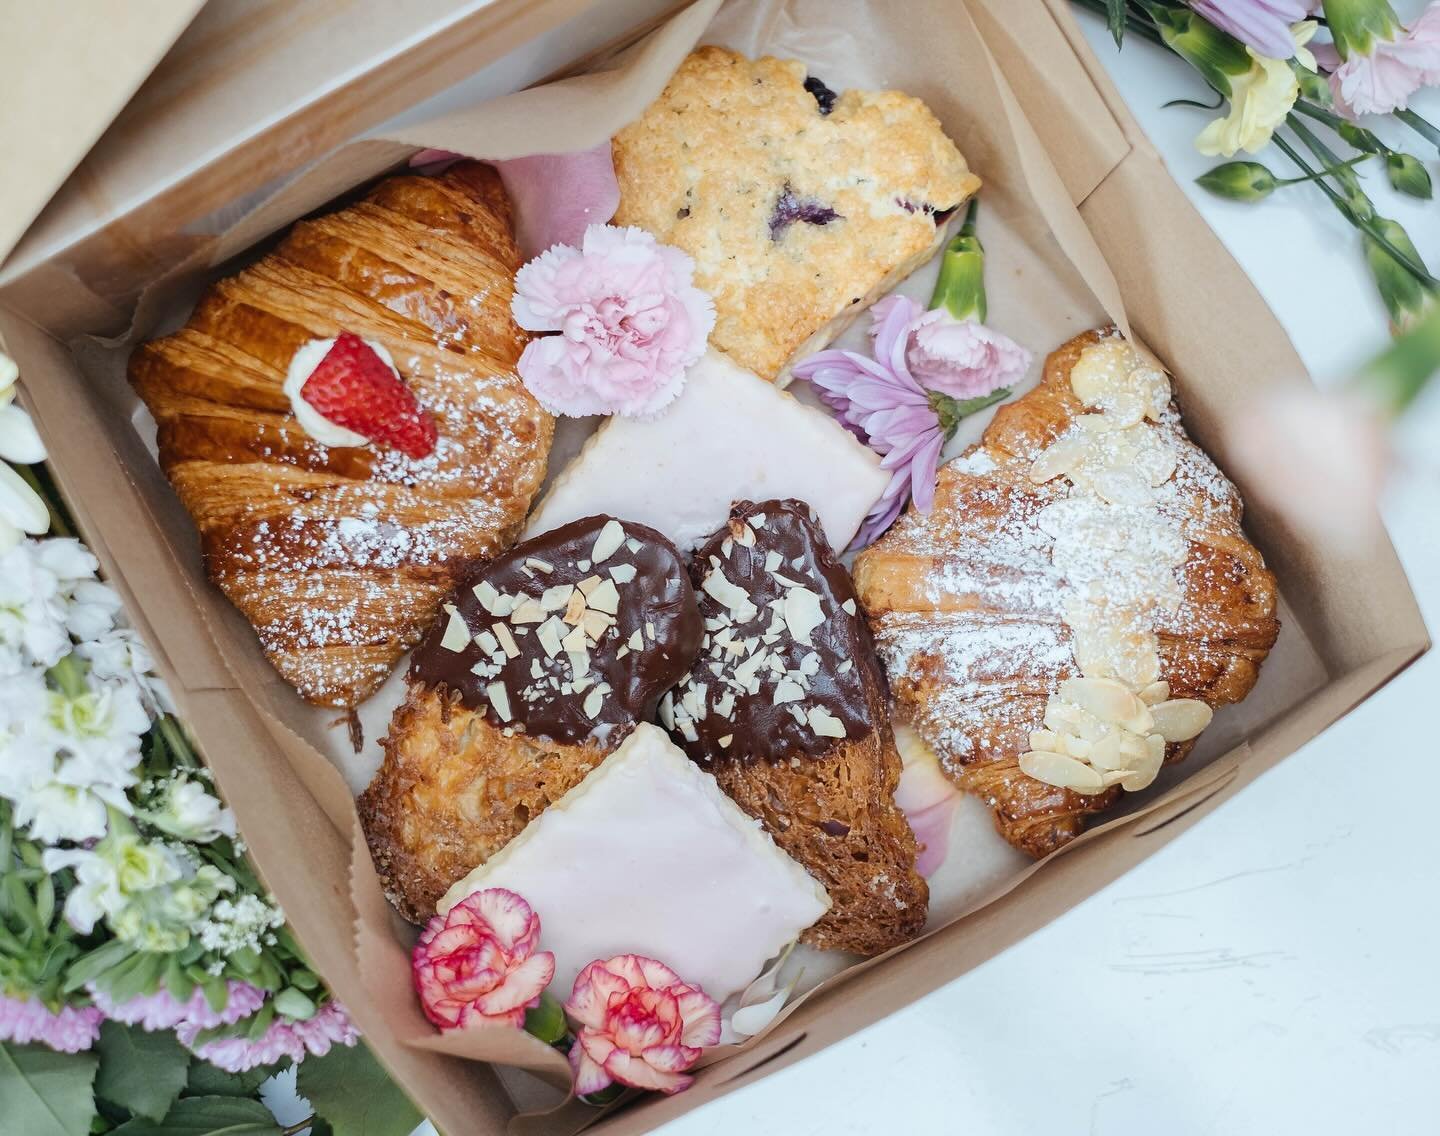 💕 Mothers&rsquo; Day PREORDERS 💐 Our online store is officially open for Mothers&rsquo; Day treats and desserts featuring some new items like our croissant biscotti and blueberry scones, and some of our holiday favorites like our macaron sets. Clic